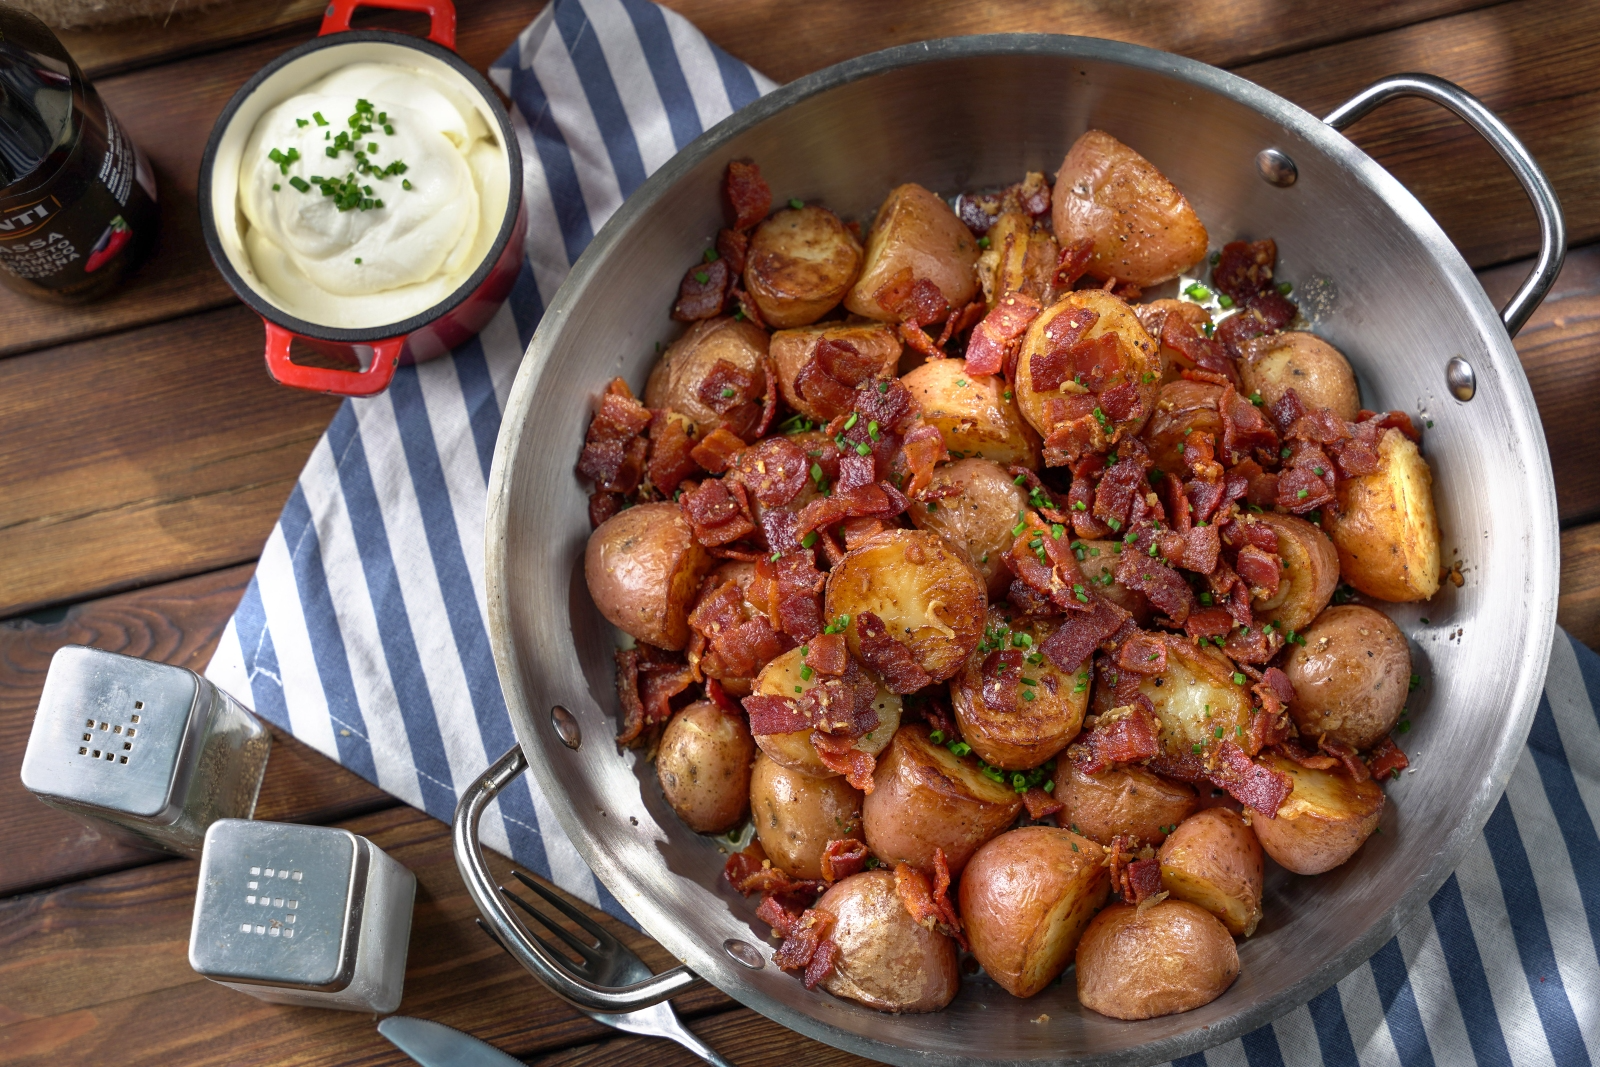 Baked Potatoes with Bacon, Sour Cream